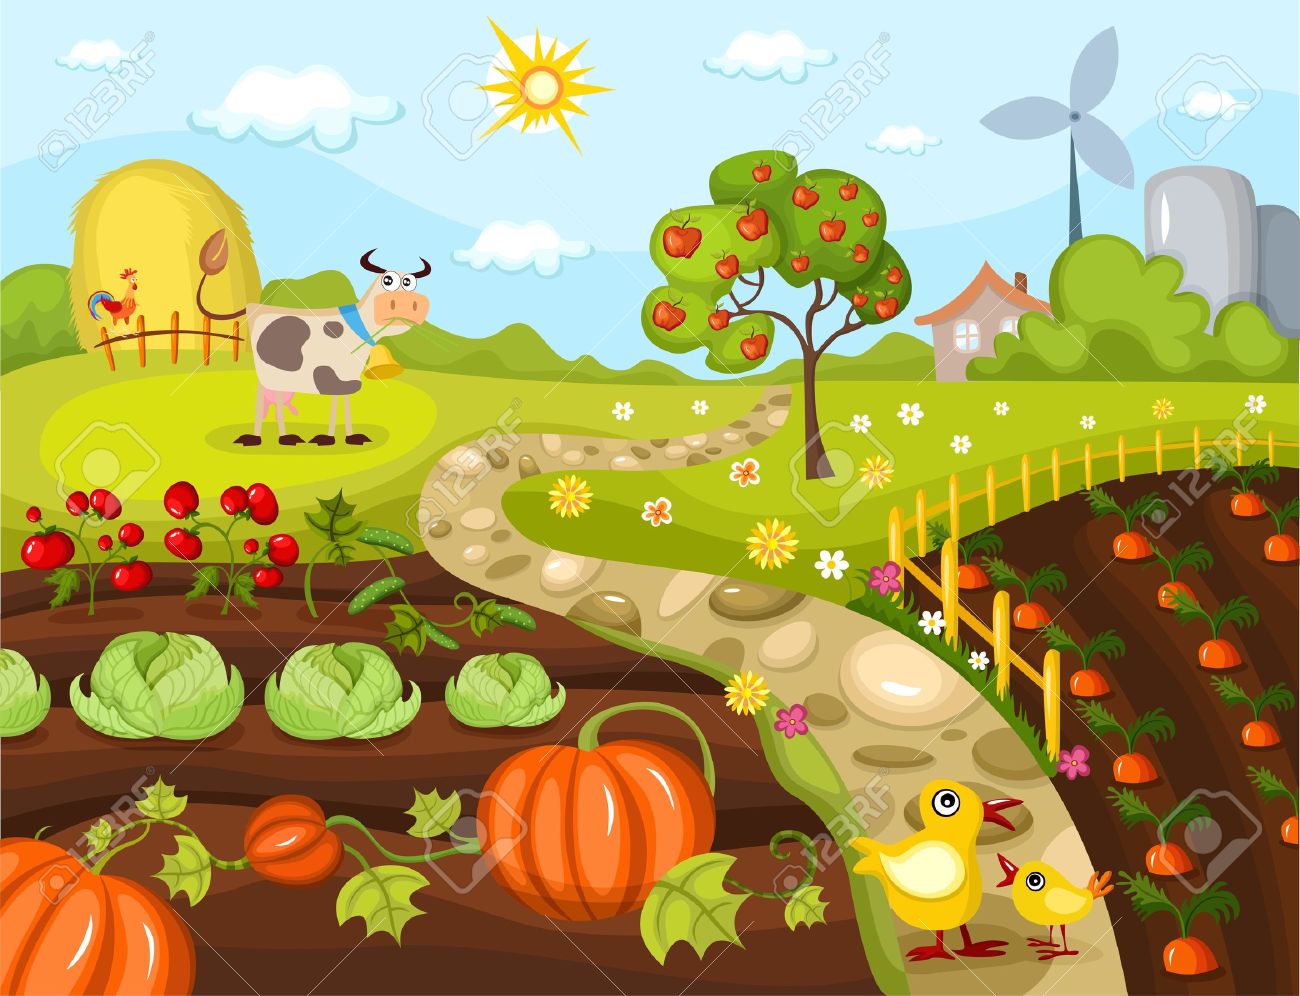 gardening clipart vegetable patch